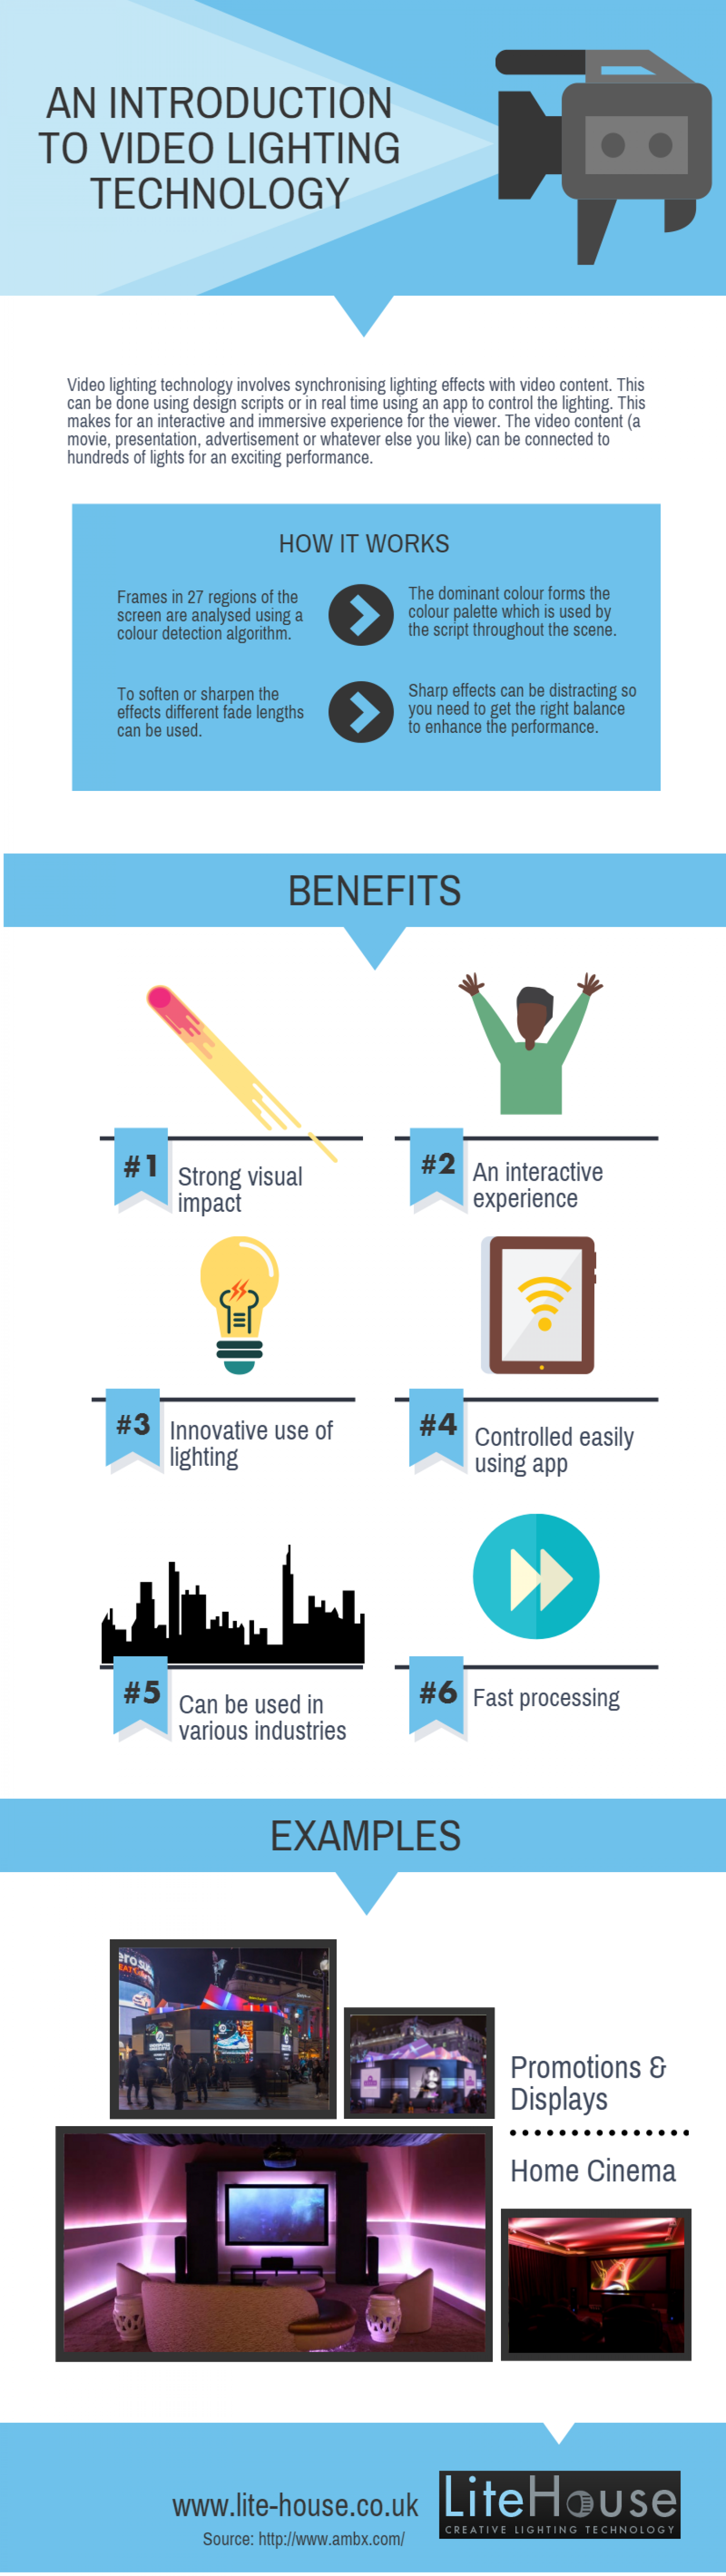 An Introduction to Video Lighting Technology Infographic